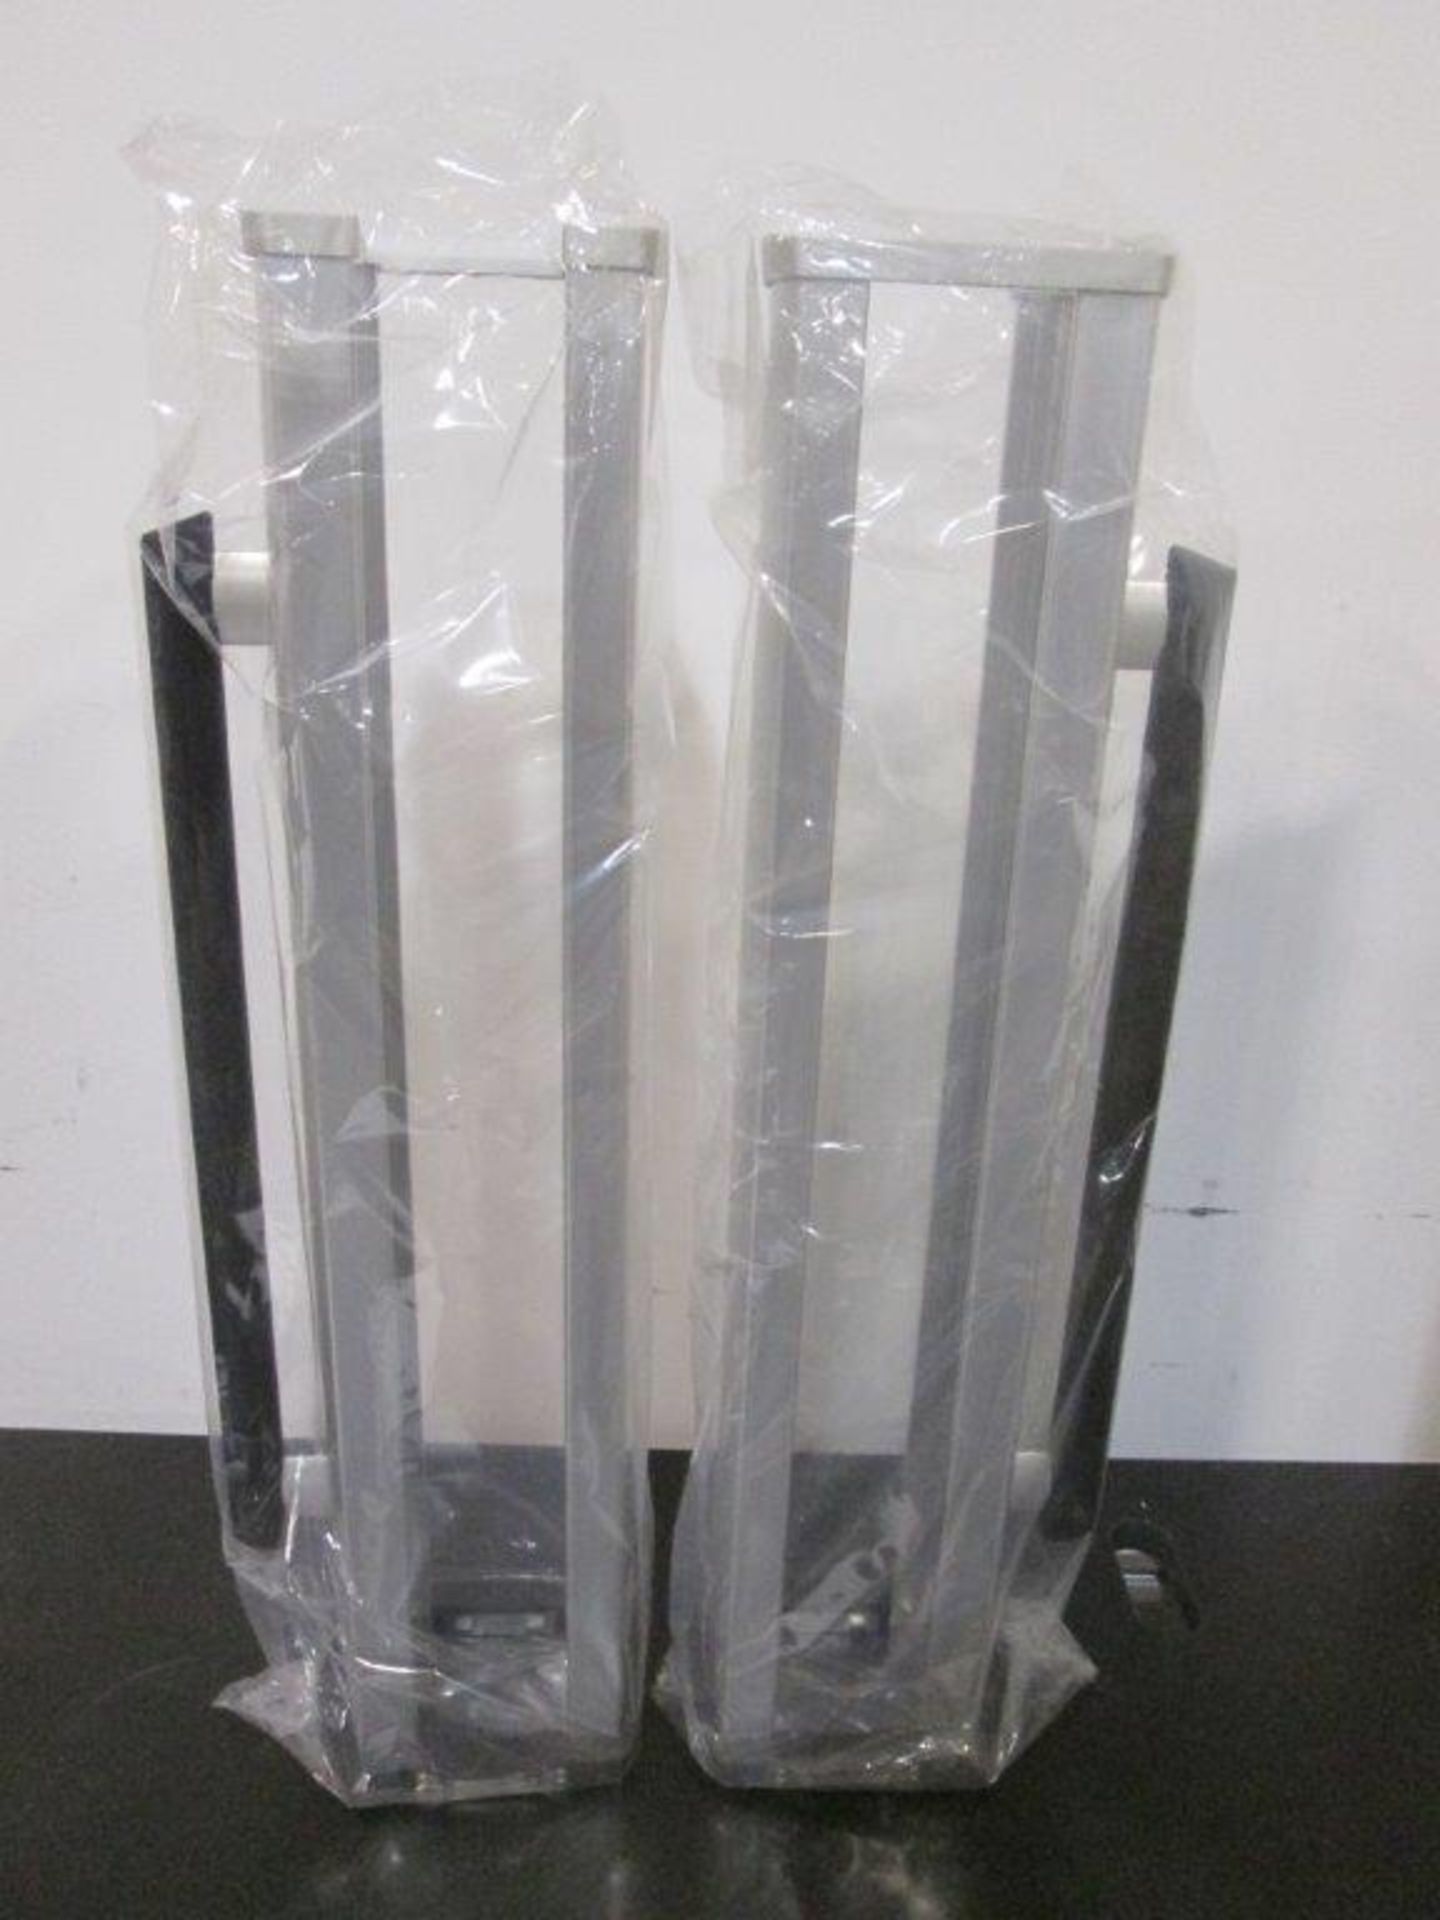 Lot (2) Unused MSD Sector Imager 6000 Microplate Stacks Model 1200 - Image 3 of 4